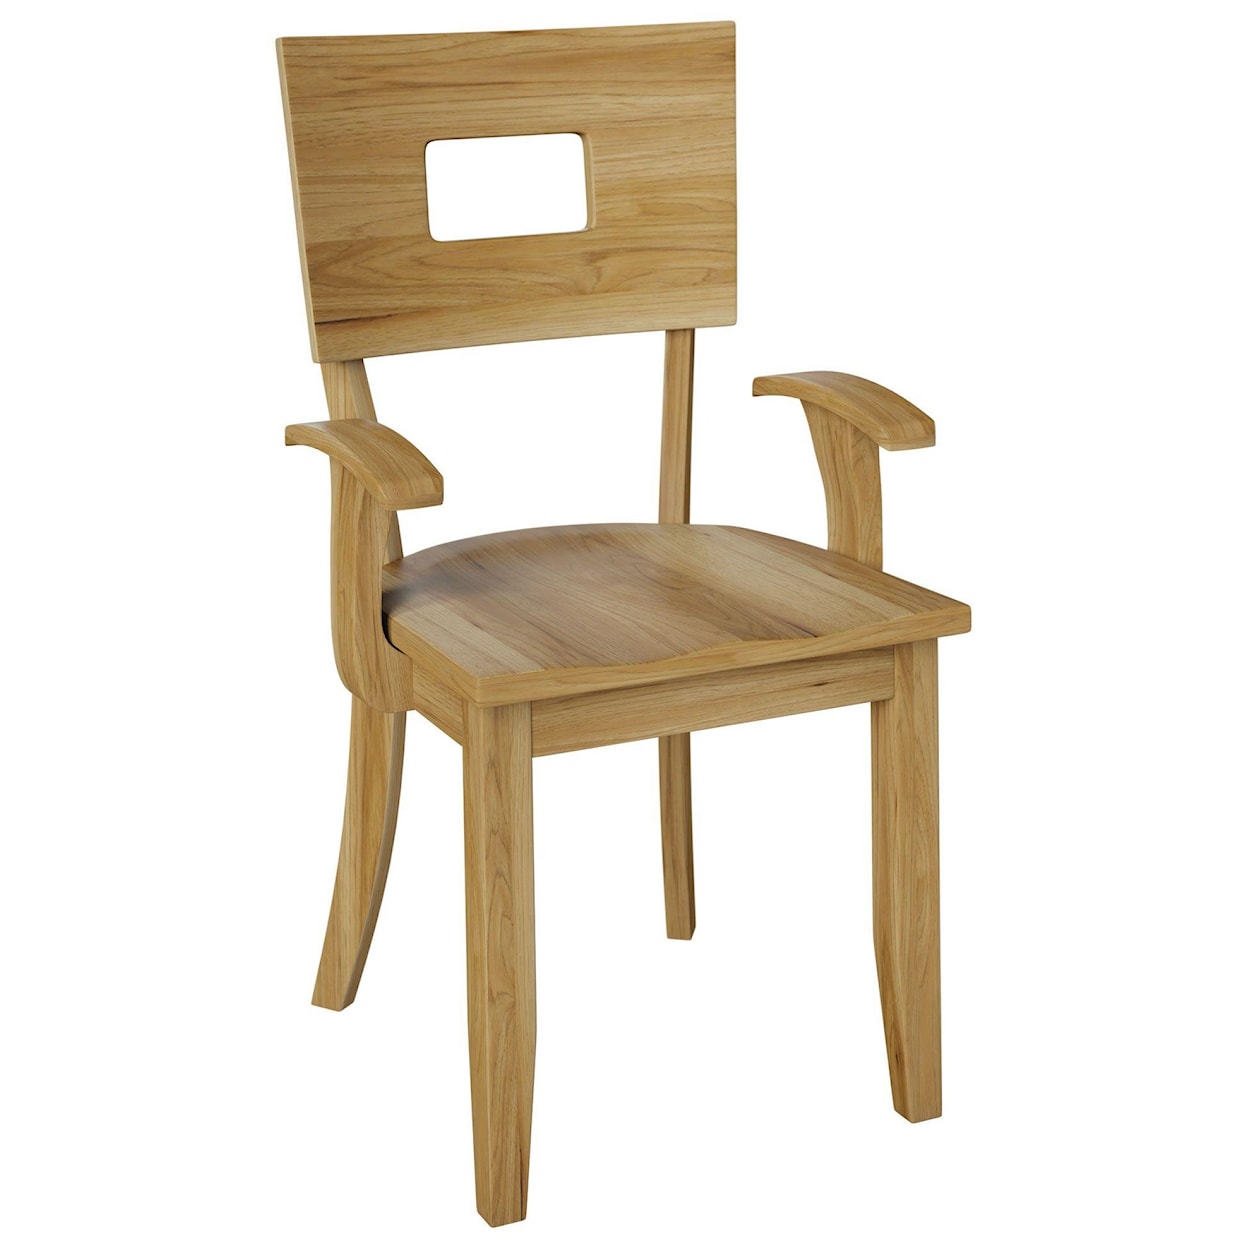 Wengerd Wood Products Morris Arm Chair